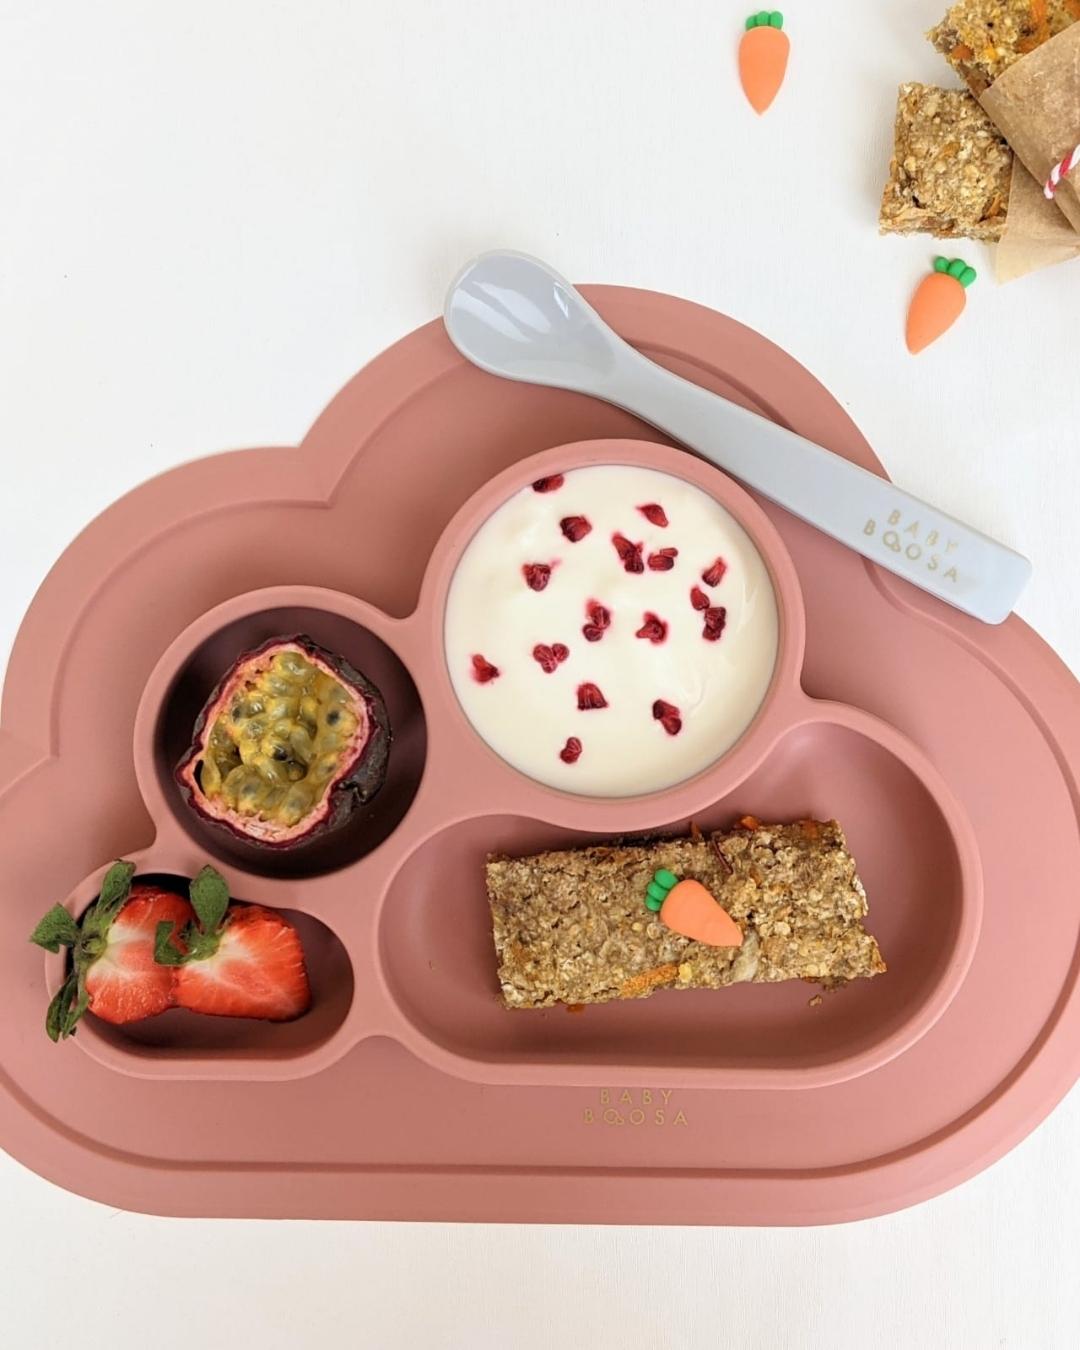 Weaning Gift Set | Luxe Silicone | All you need Essentials | Mess-Free | Grippy non-slip suction | Easy Clean | Dentist Developed (Dusky Rose) - £80 Value